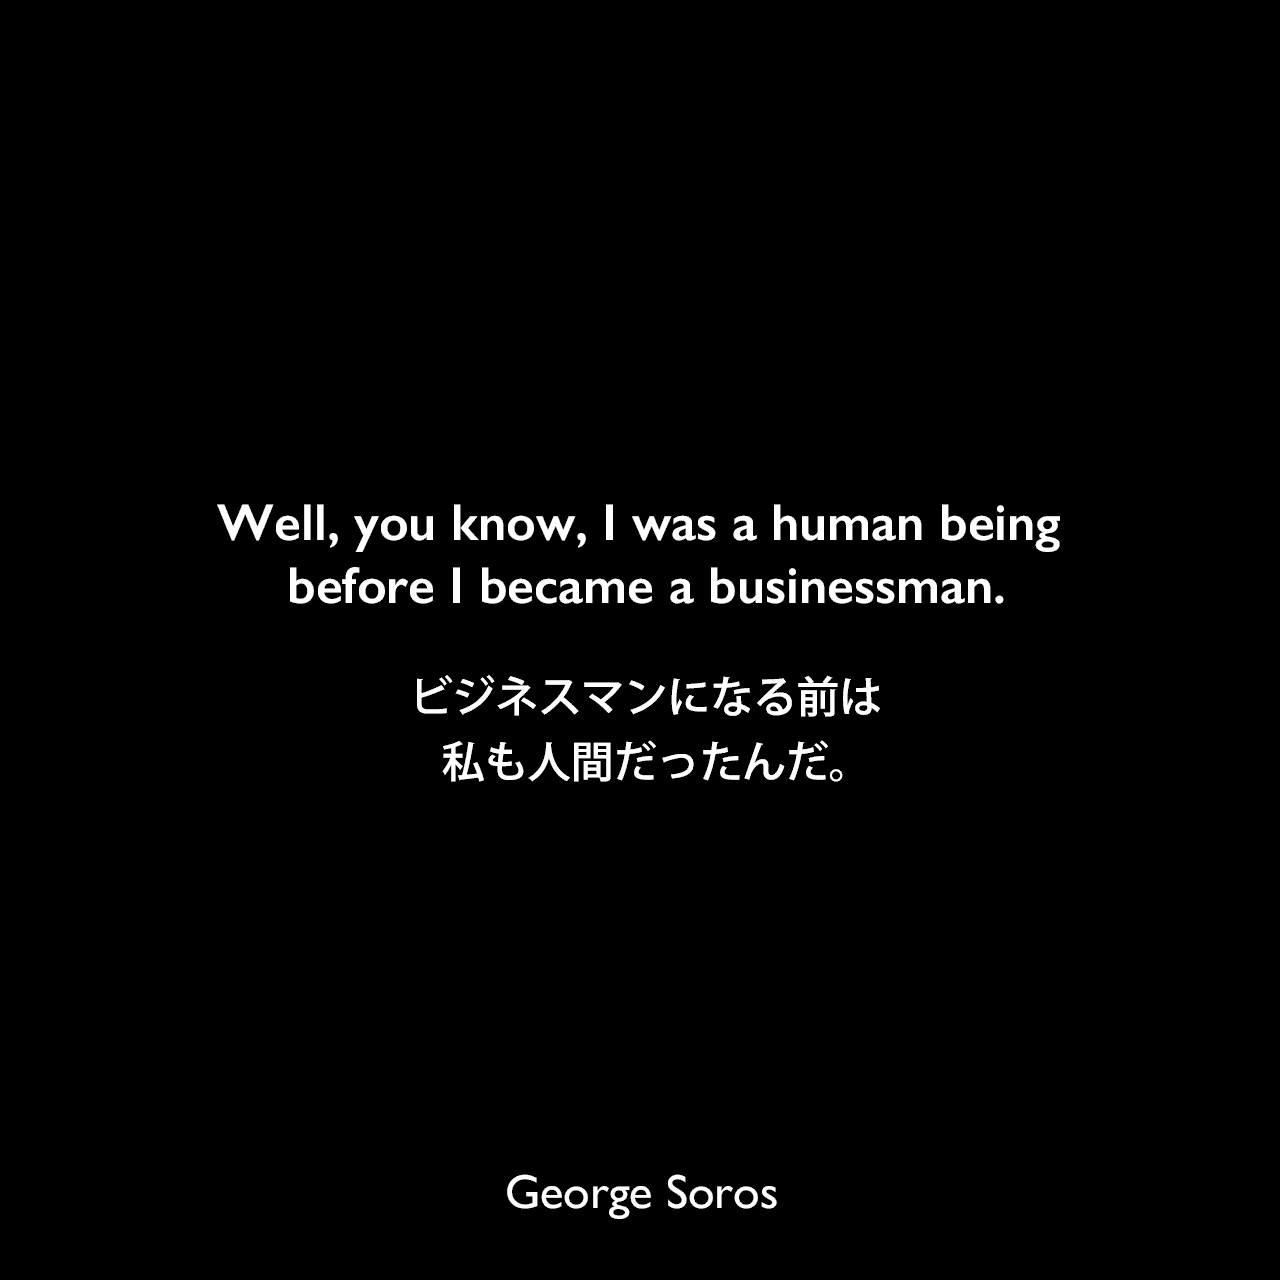 Well, you know, I was a human being before I became a businessman.ビジネスマンになる前は、私も人間だったんだ。George Soros